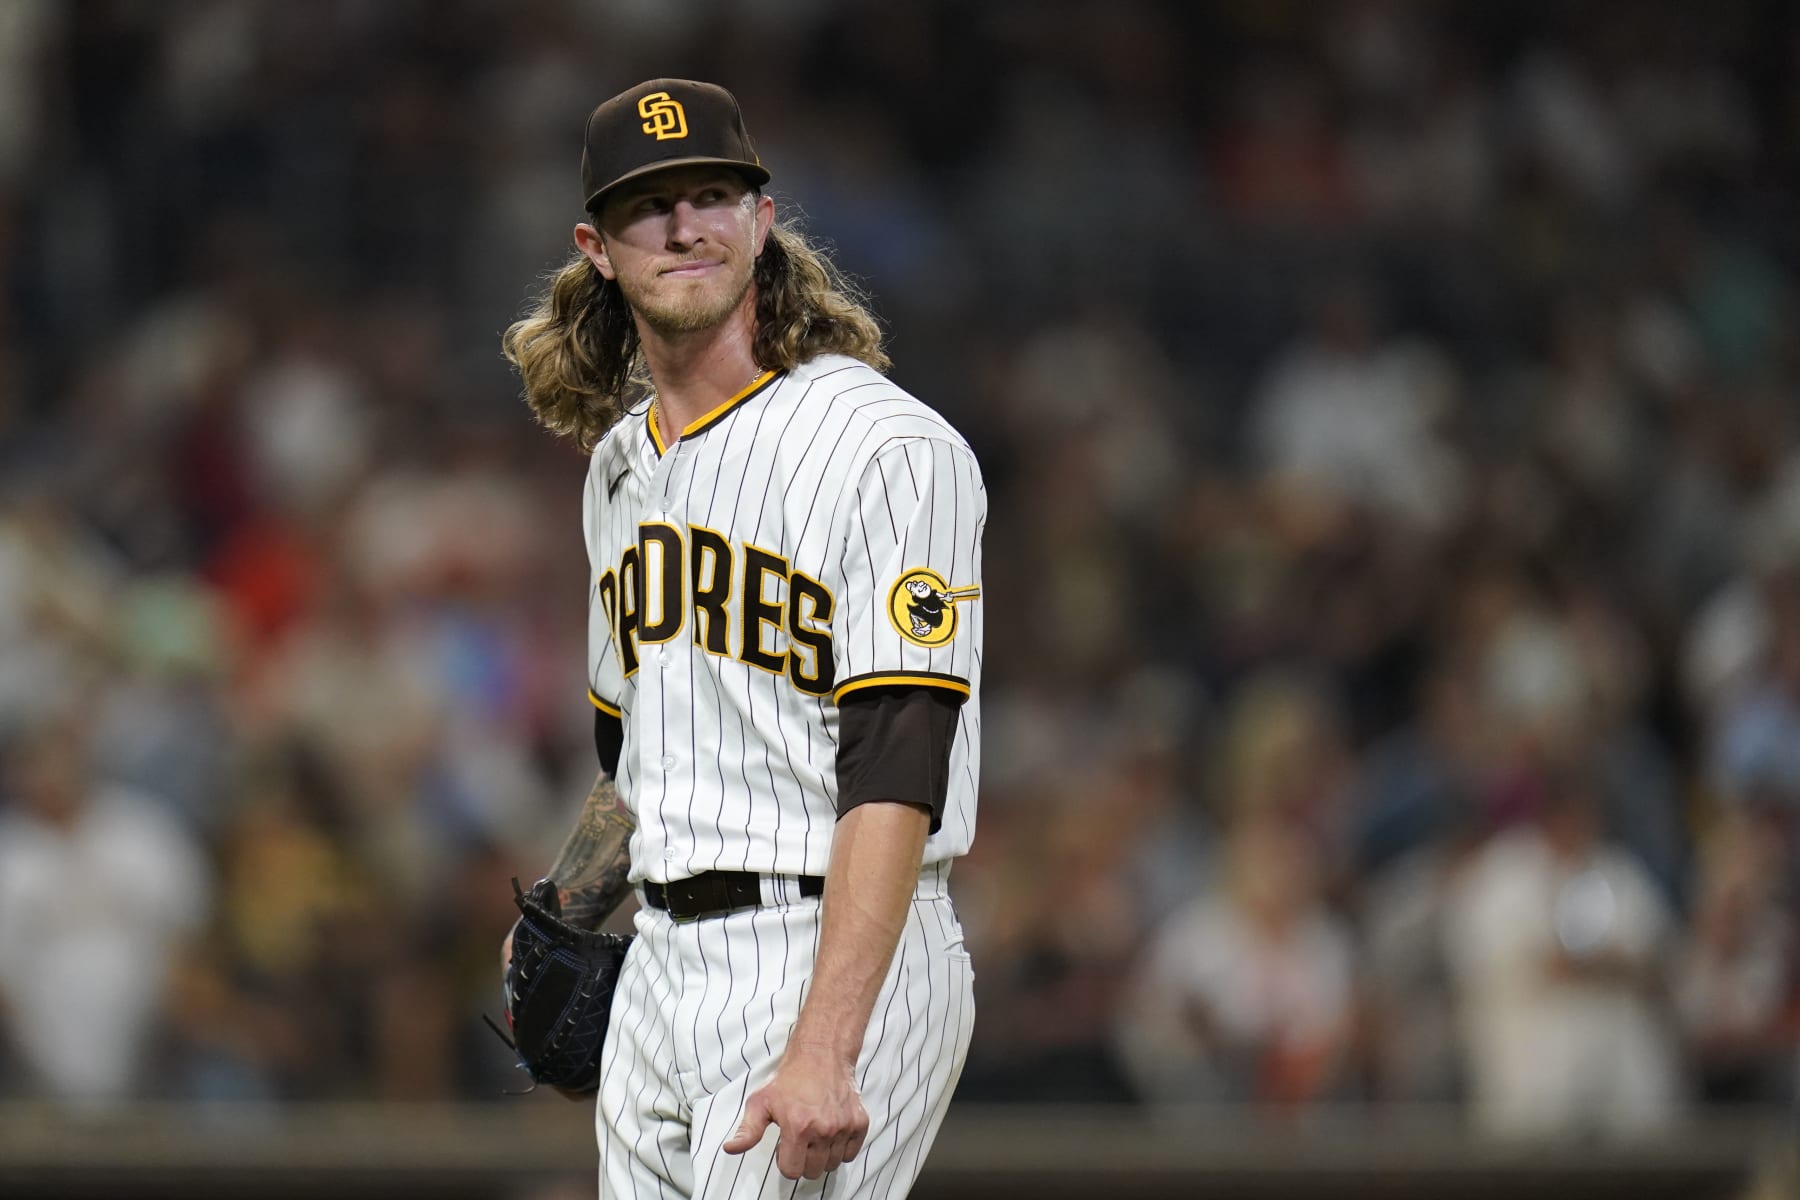 Big Brown Machine on X: Here's my guess at what a Padres City